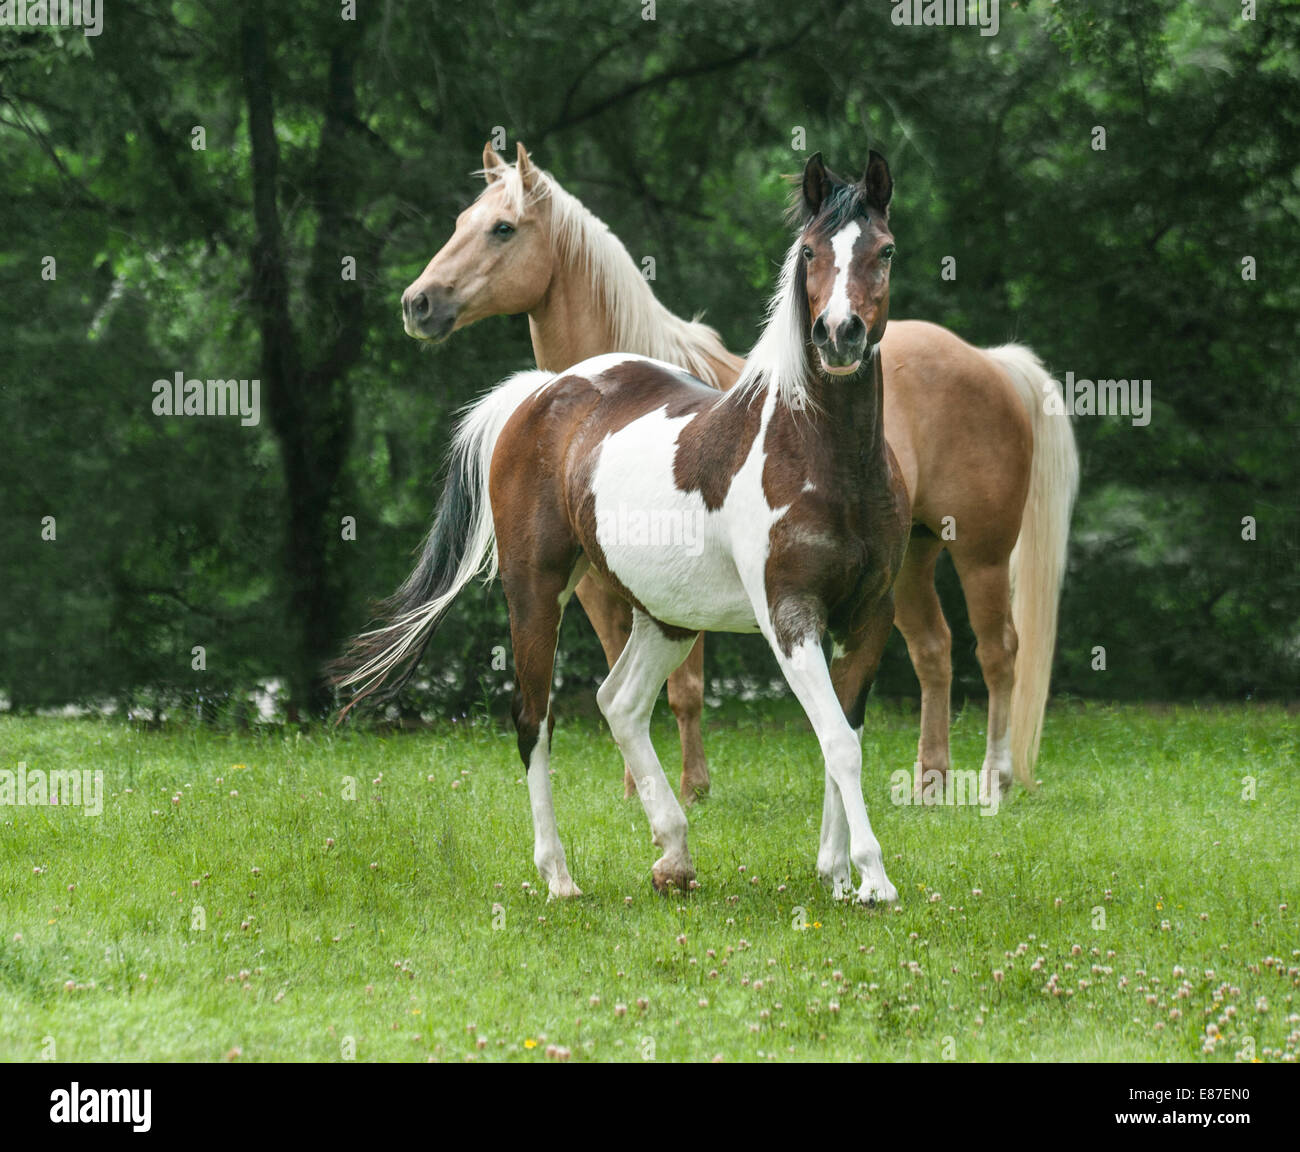 Quarter Horse gelding and Pinto National Show Horse mare Stock Photo